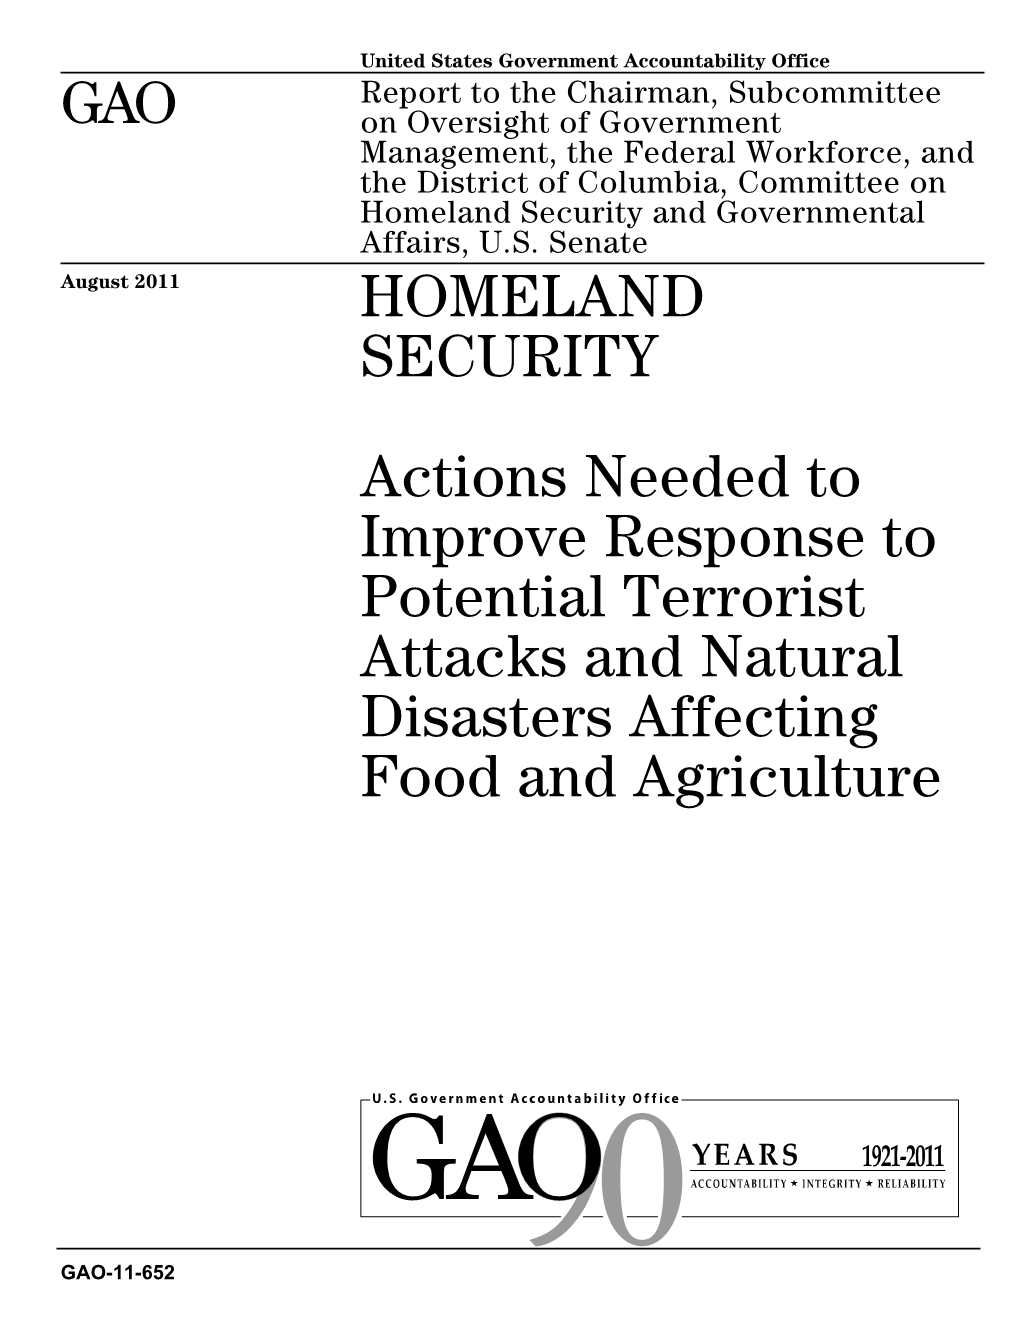 GAO-11-652 Homeland Security: Actions Needed to Improve